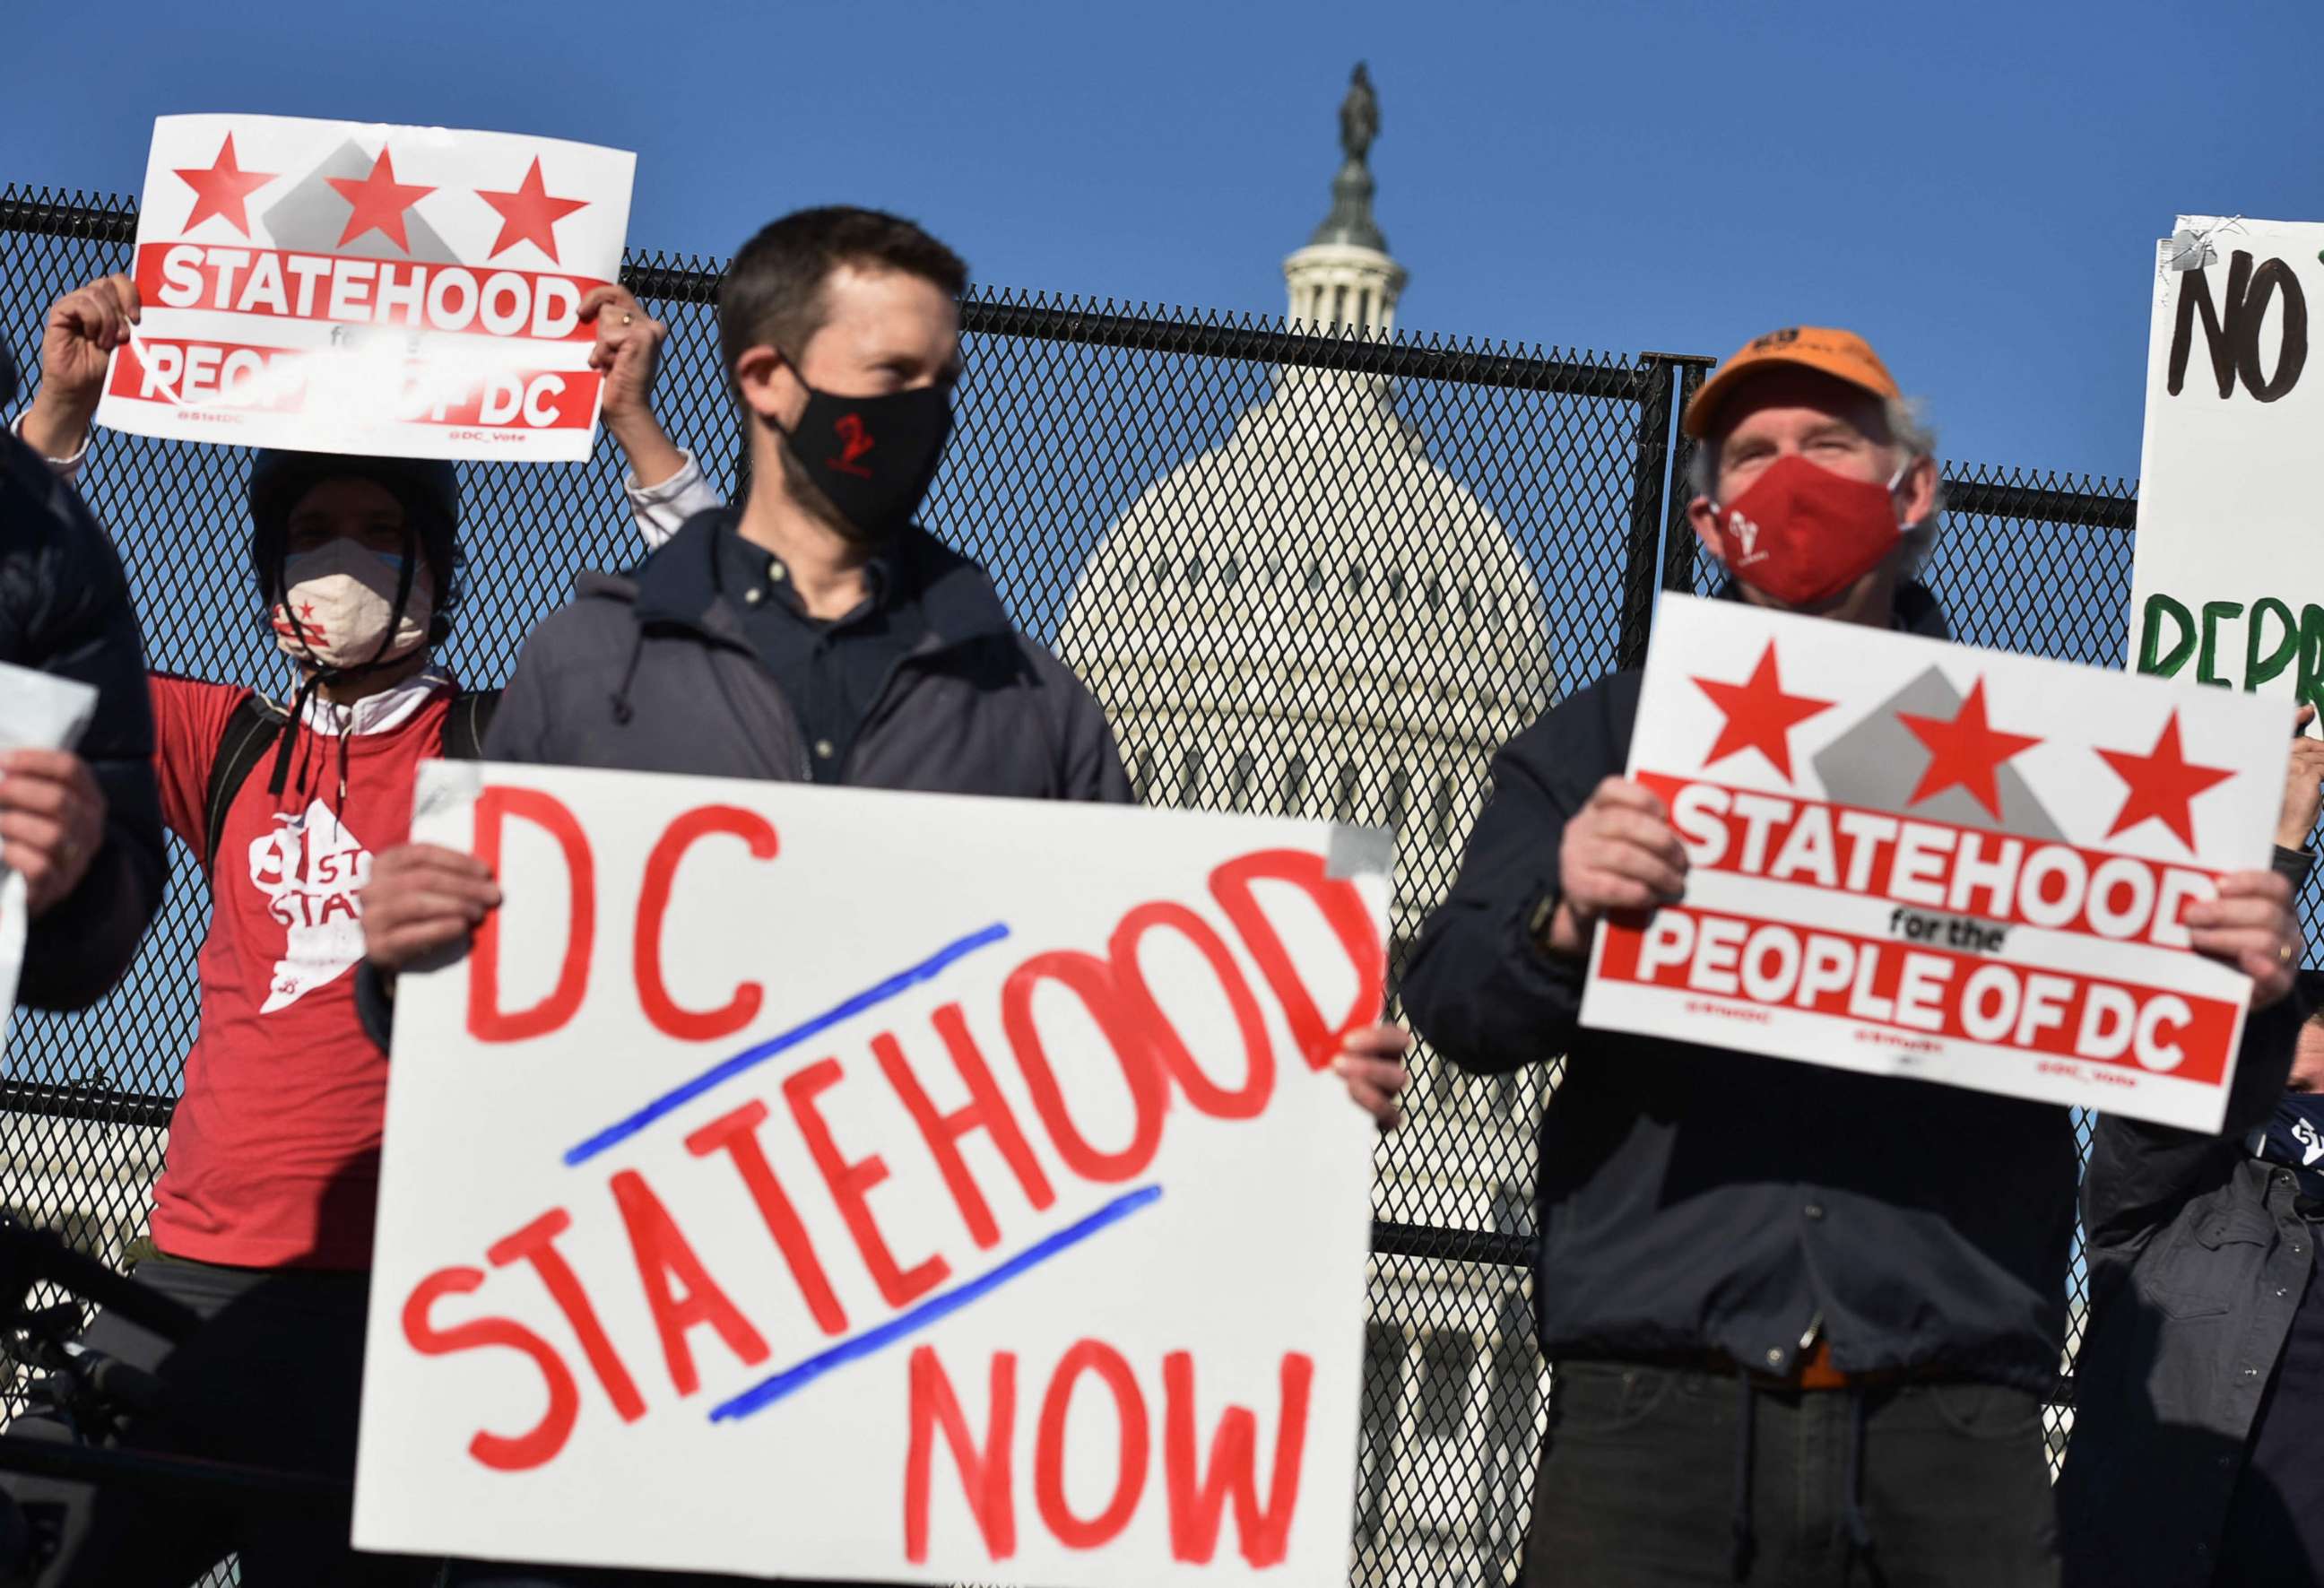 PHOTO:Activists hold signs as they take part in a rally in support of DC statehood near the US Capitol in Washington, March 22, 2021.